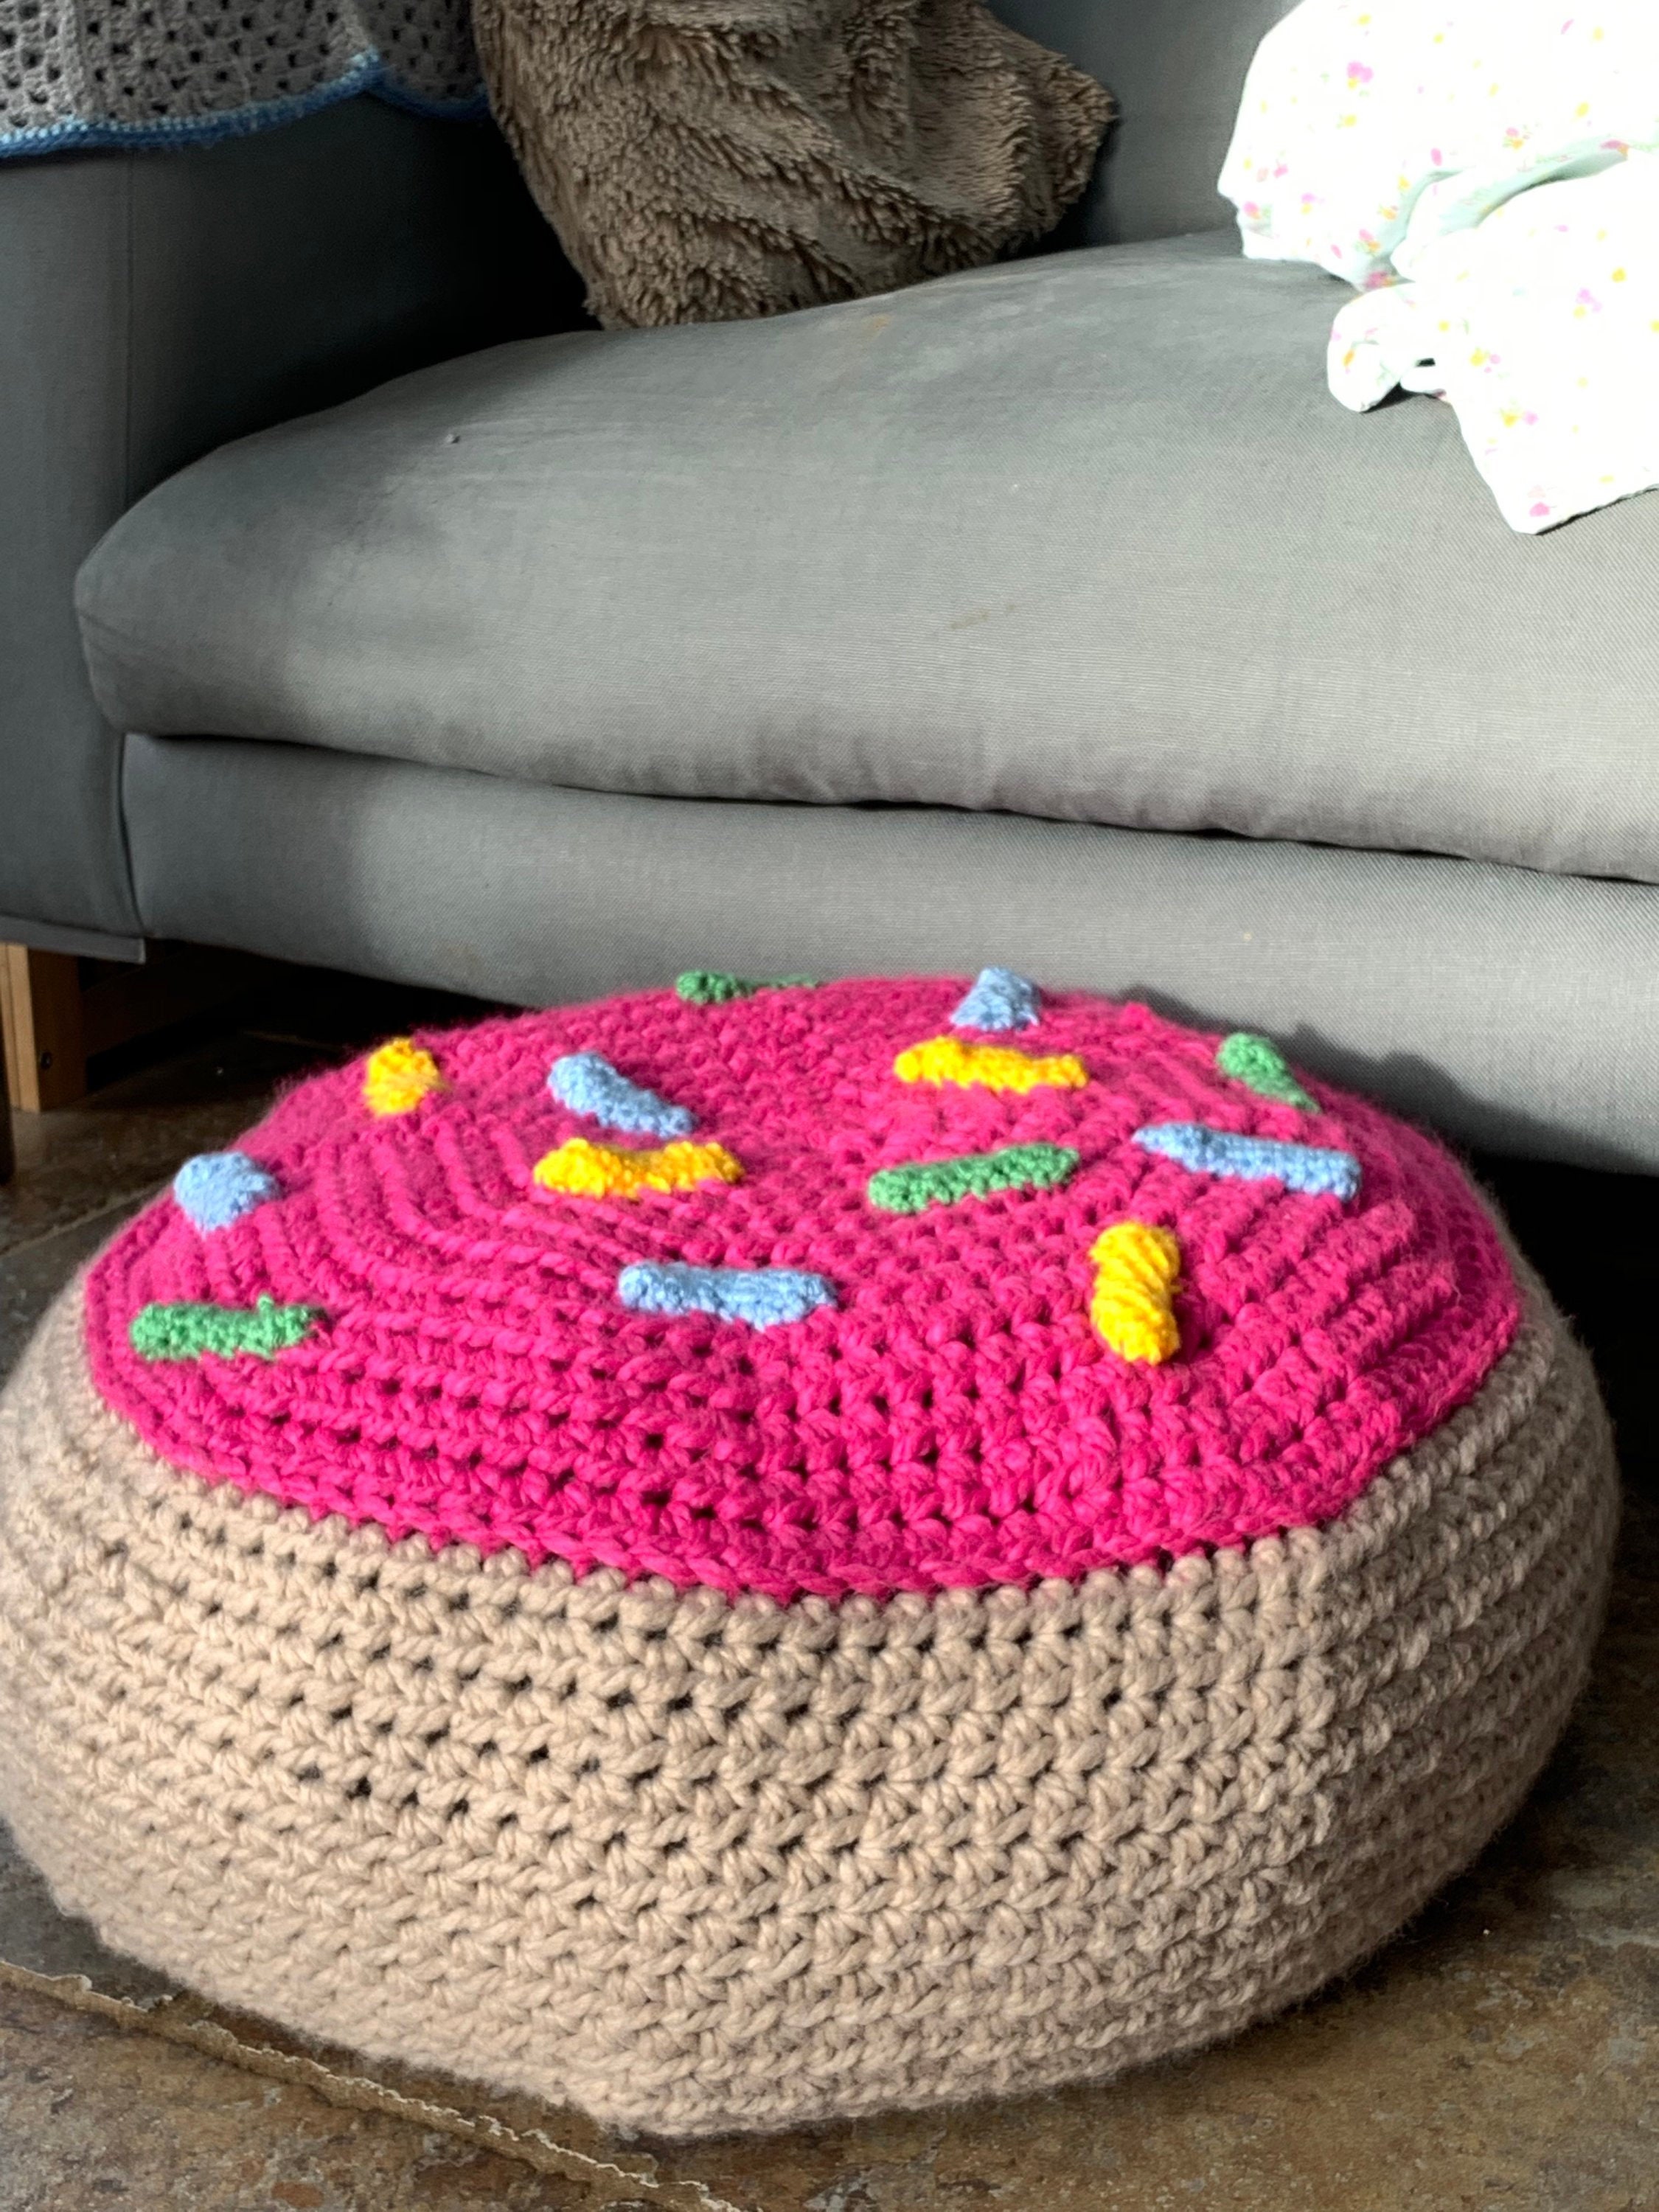 Any advice working jumbo yarn in the round?? Trying to make a pouf